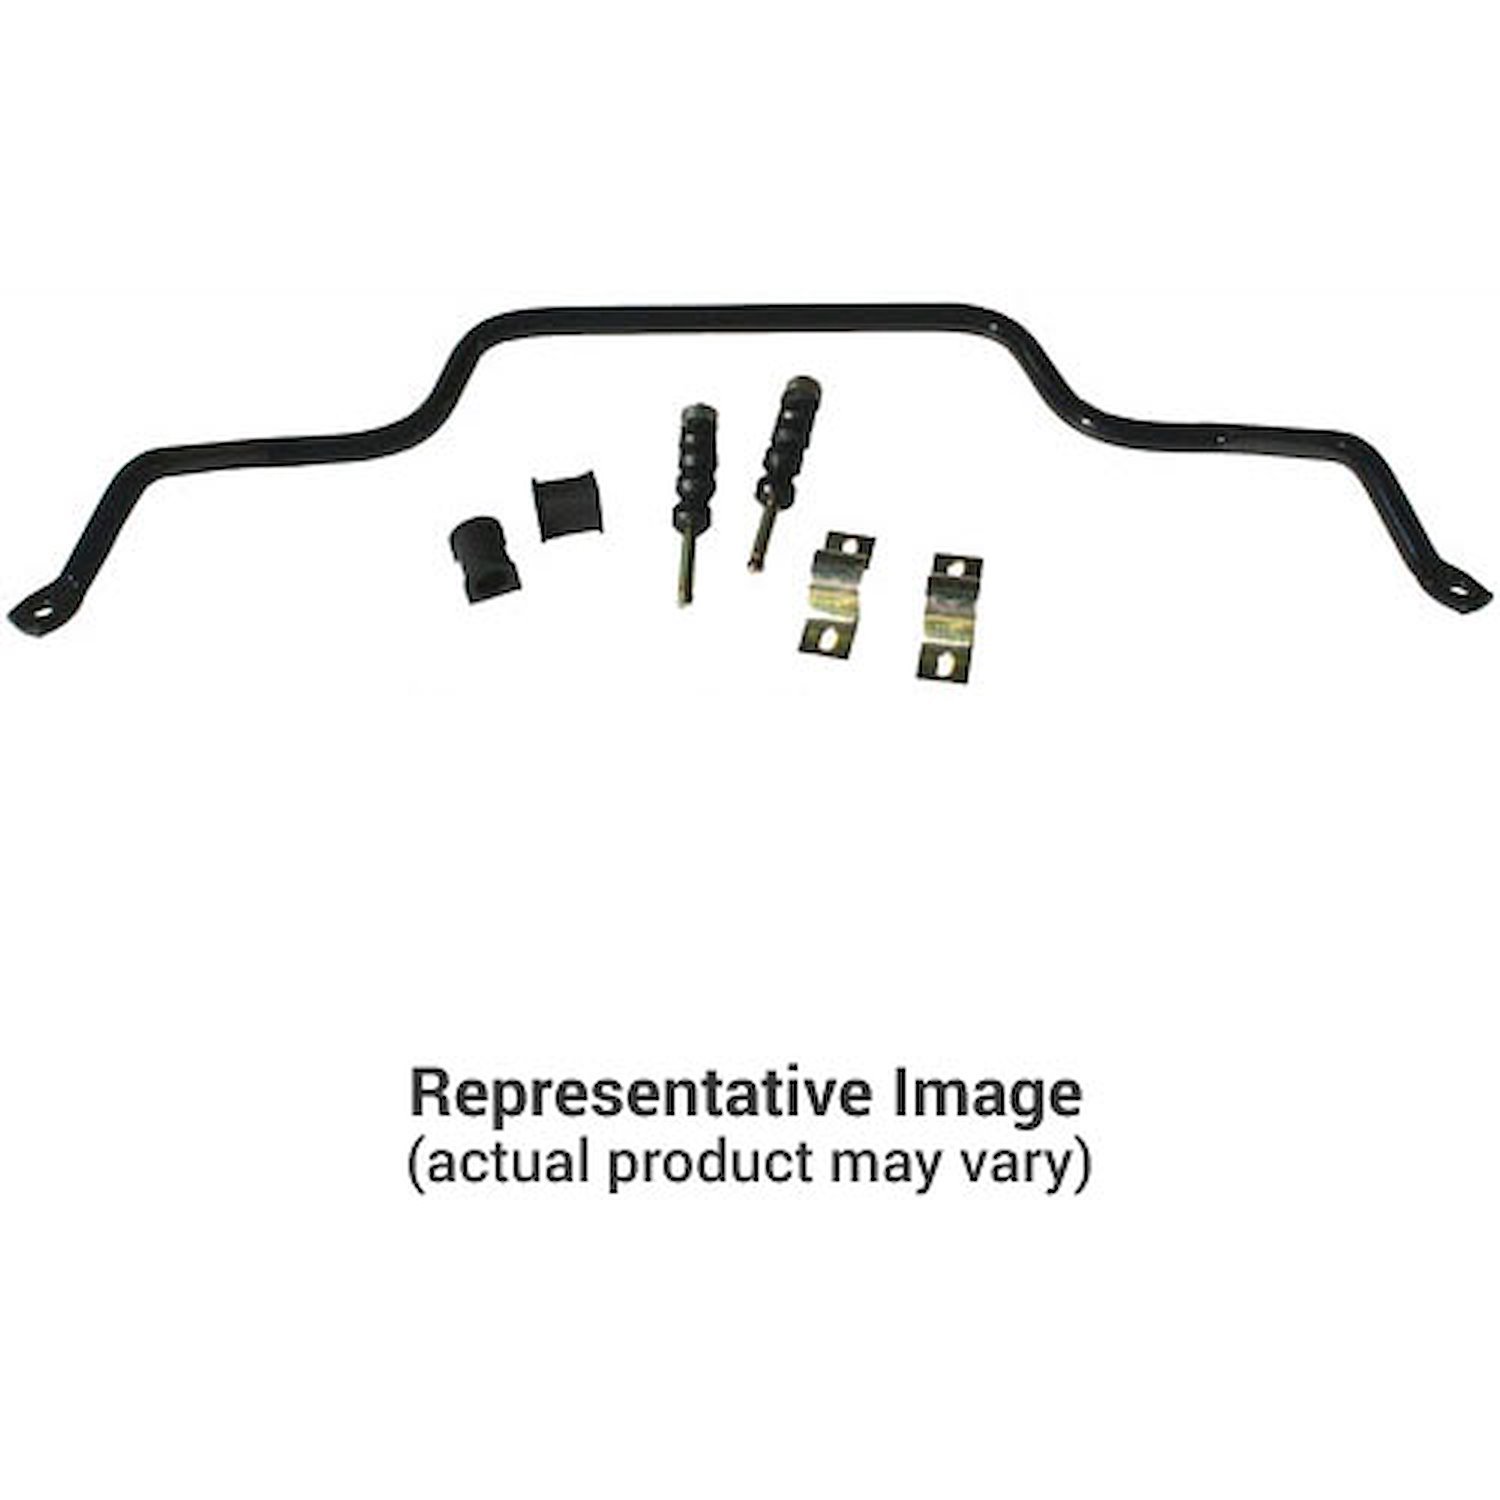 3/4" Rear Sway Bar 1985-88 Chevy II, Concours and Nova